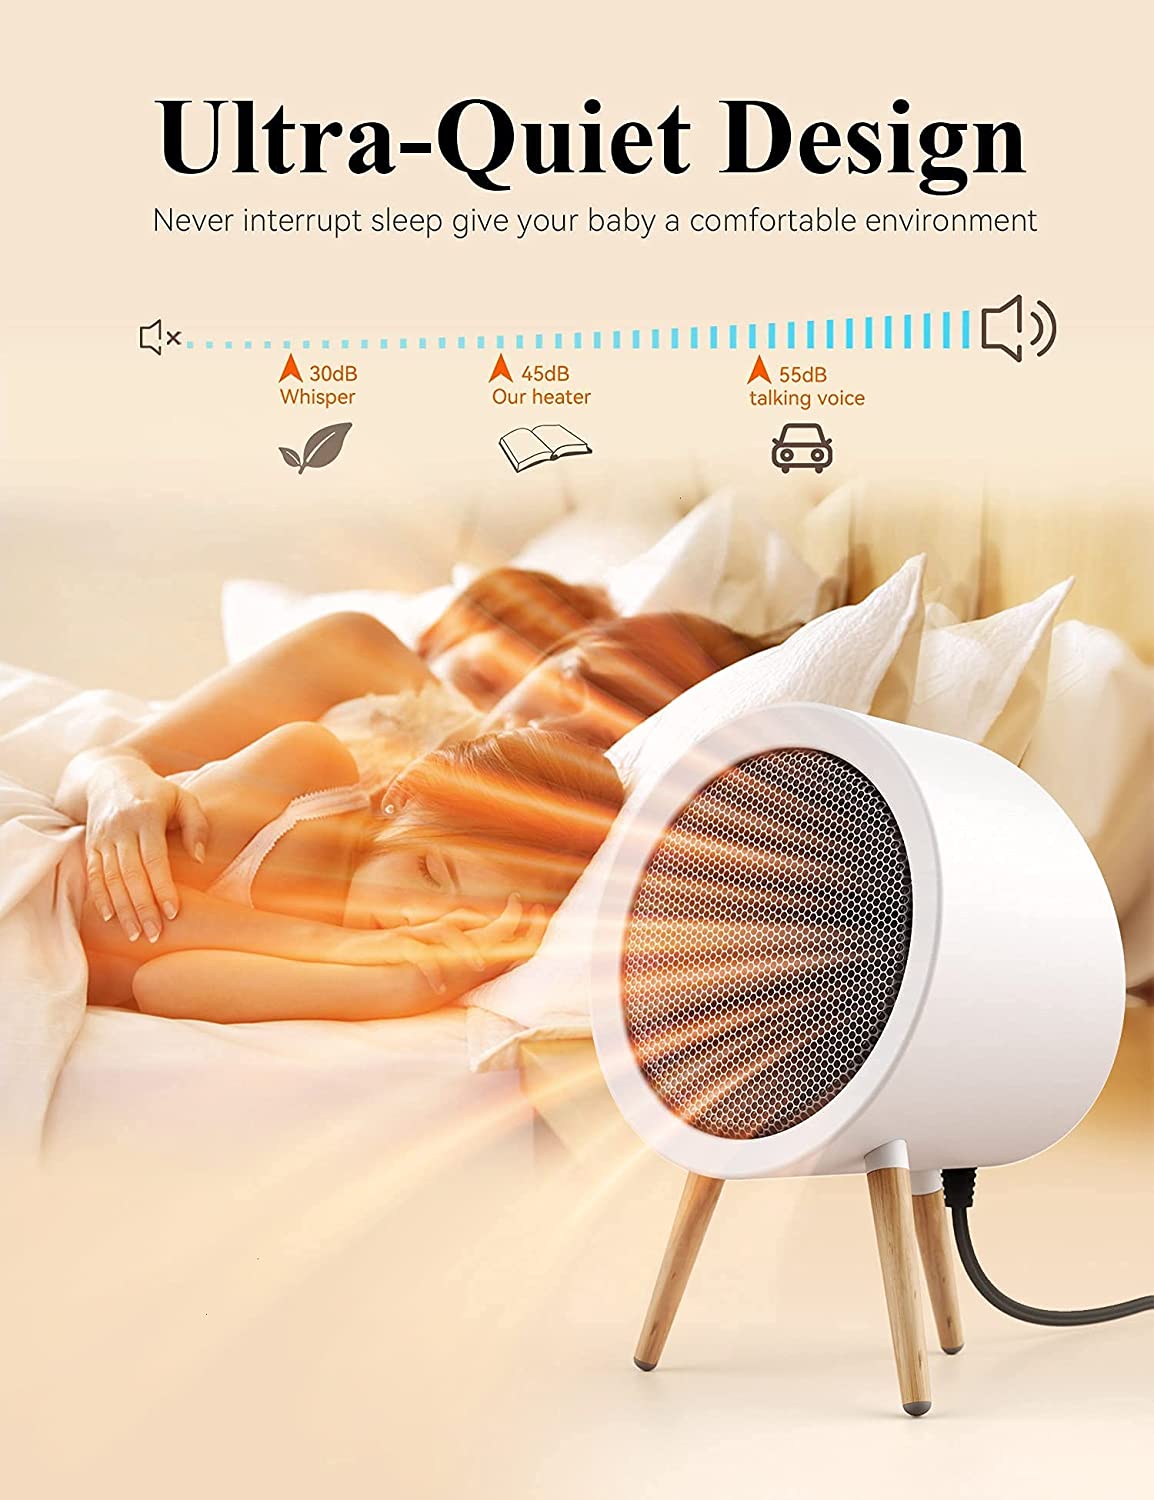 GAIATOP Space Heater, Energy Efficient Small Space Heater for Bedroom